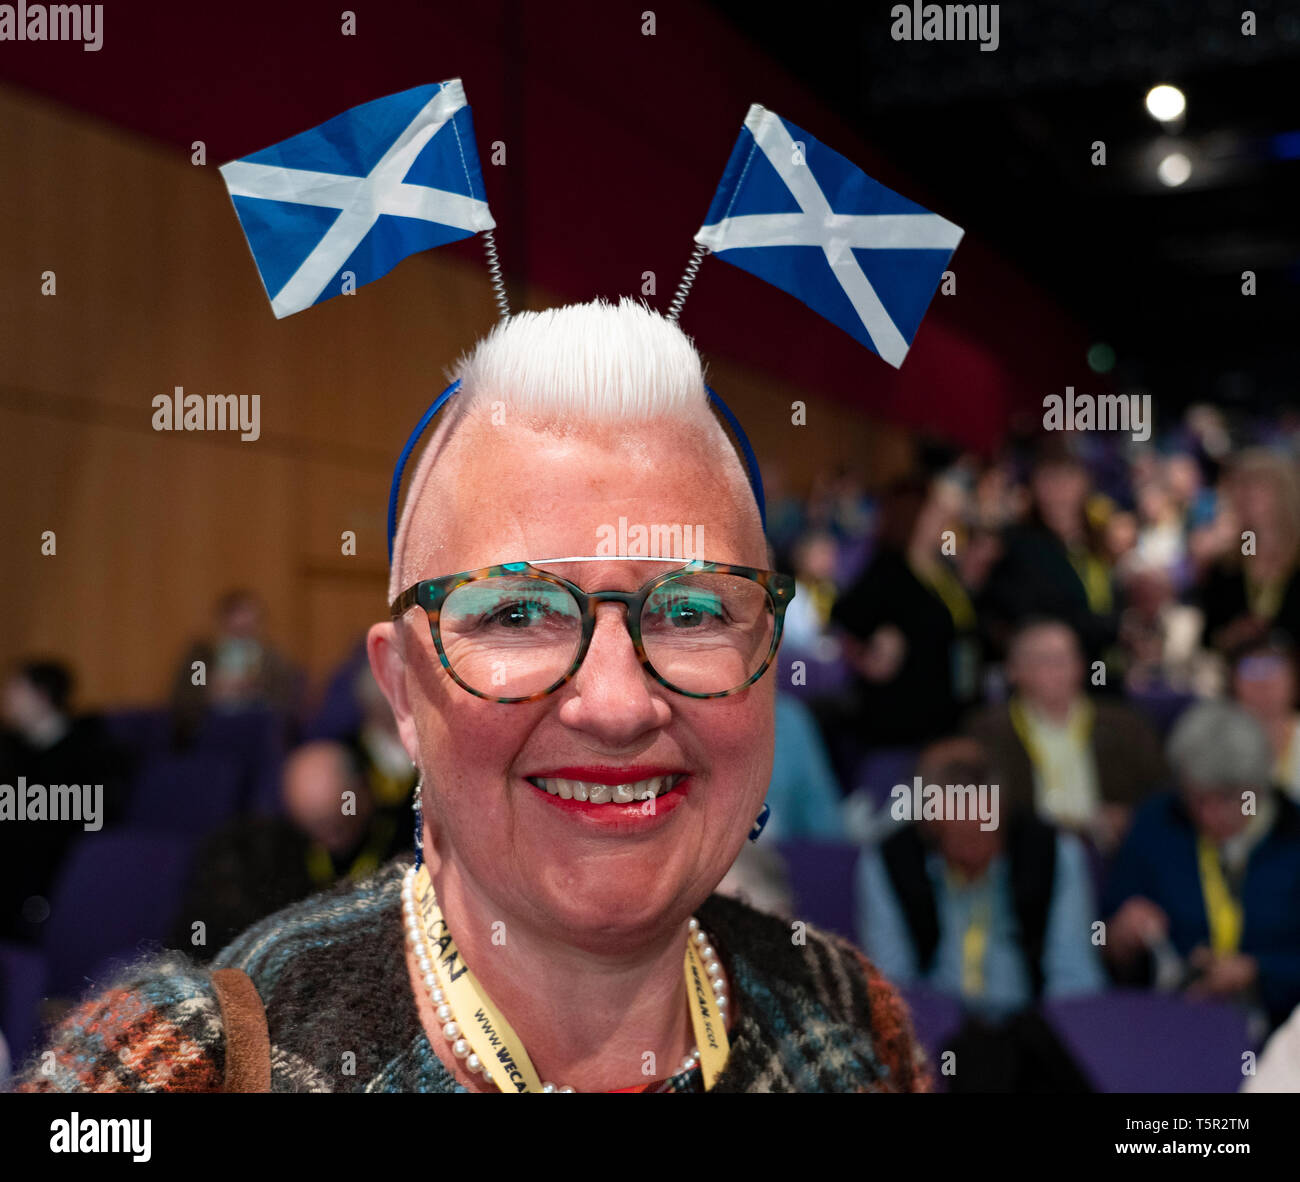 Edinburgh, Scotland, UK. 27th Apr, 2019. SNP ( Scottish National Party) Spring Conference takes place at the EICC ( Edinburgh International Conference Centre) in Edinburgh. Pictured Agnes Magowan a delegate at the conference with patriotic headwear. Credit: Iain Masterton/Alamy Live News Credit: Iain Masterton/Alamy Live News Stock Photo